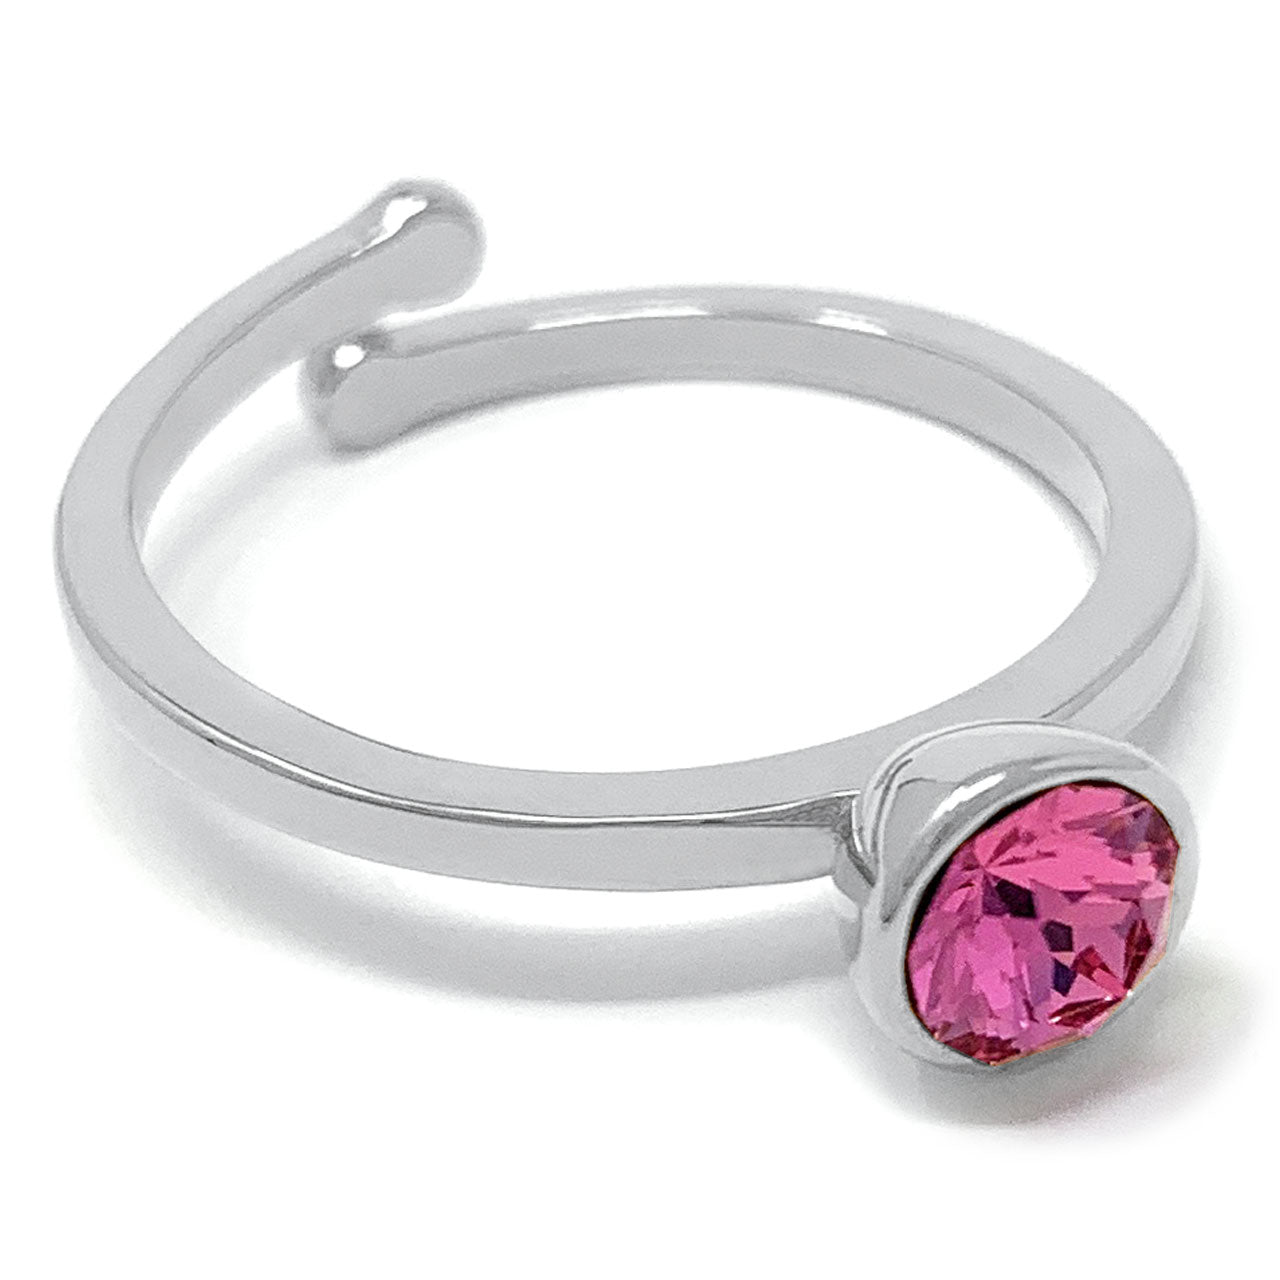 Harley Adjustable Ring with Pink Rose Round Crystals from Swarovski Silver Toned Rhodium Plated - Ed Heart